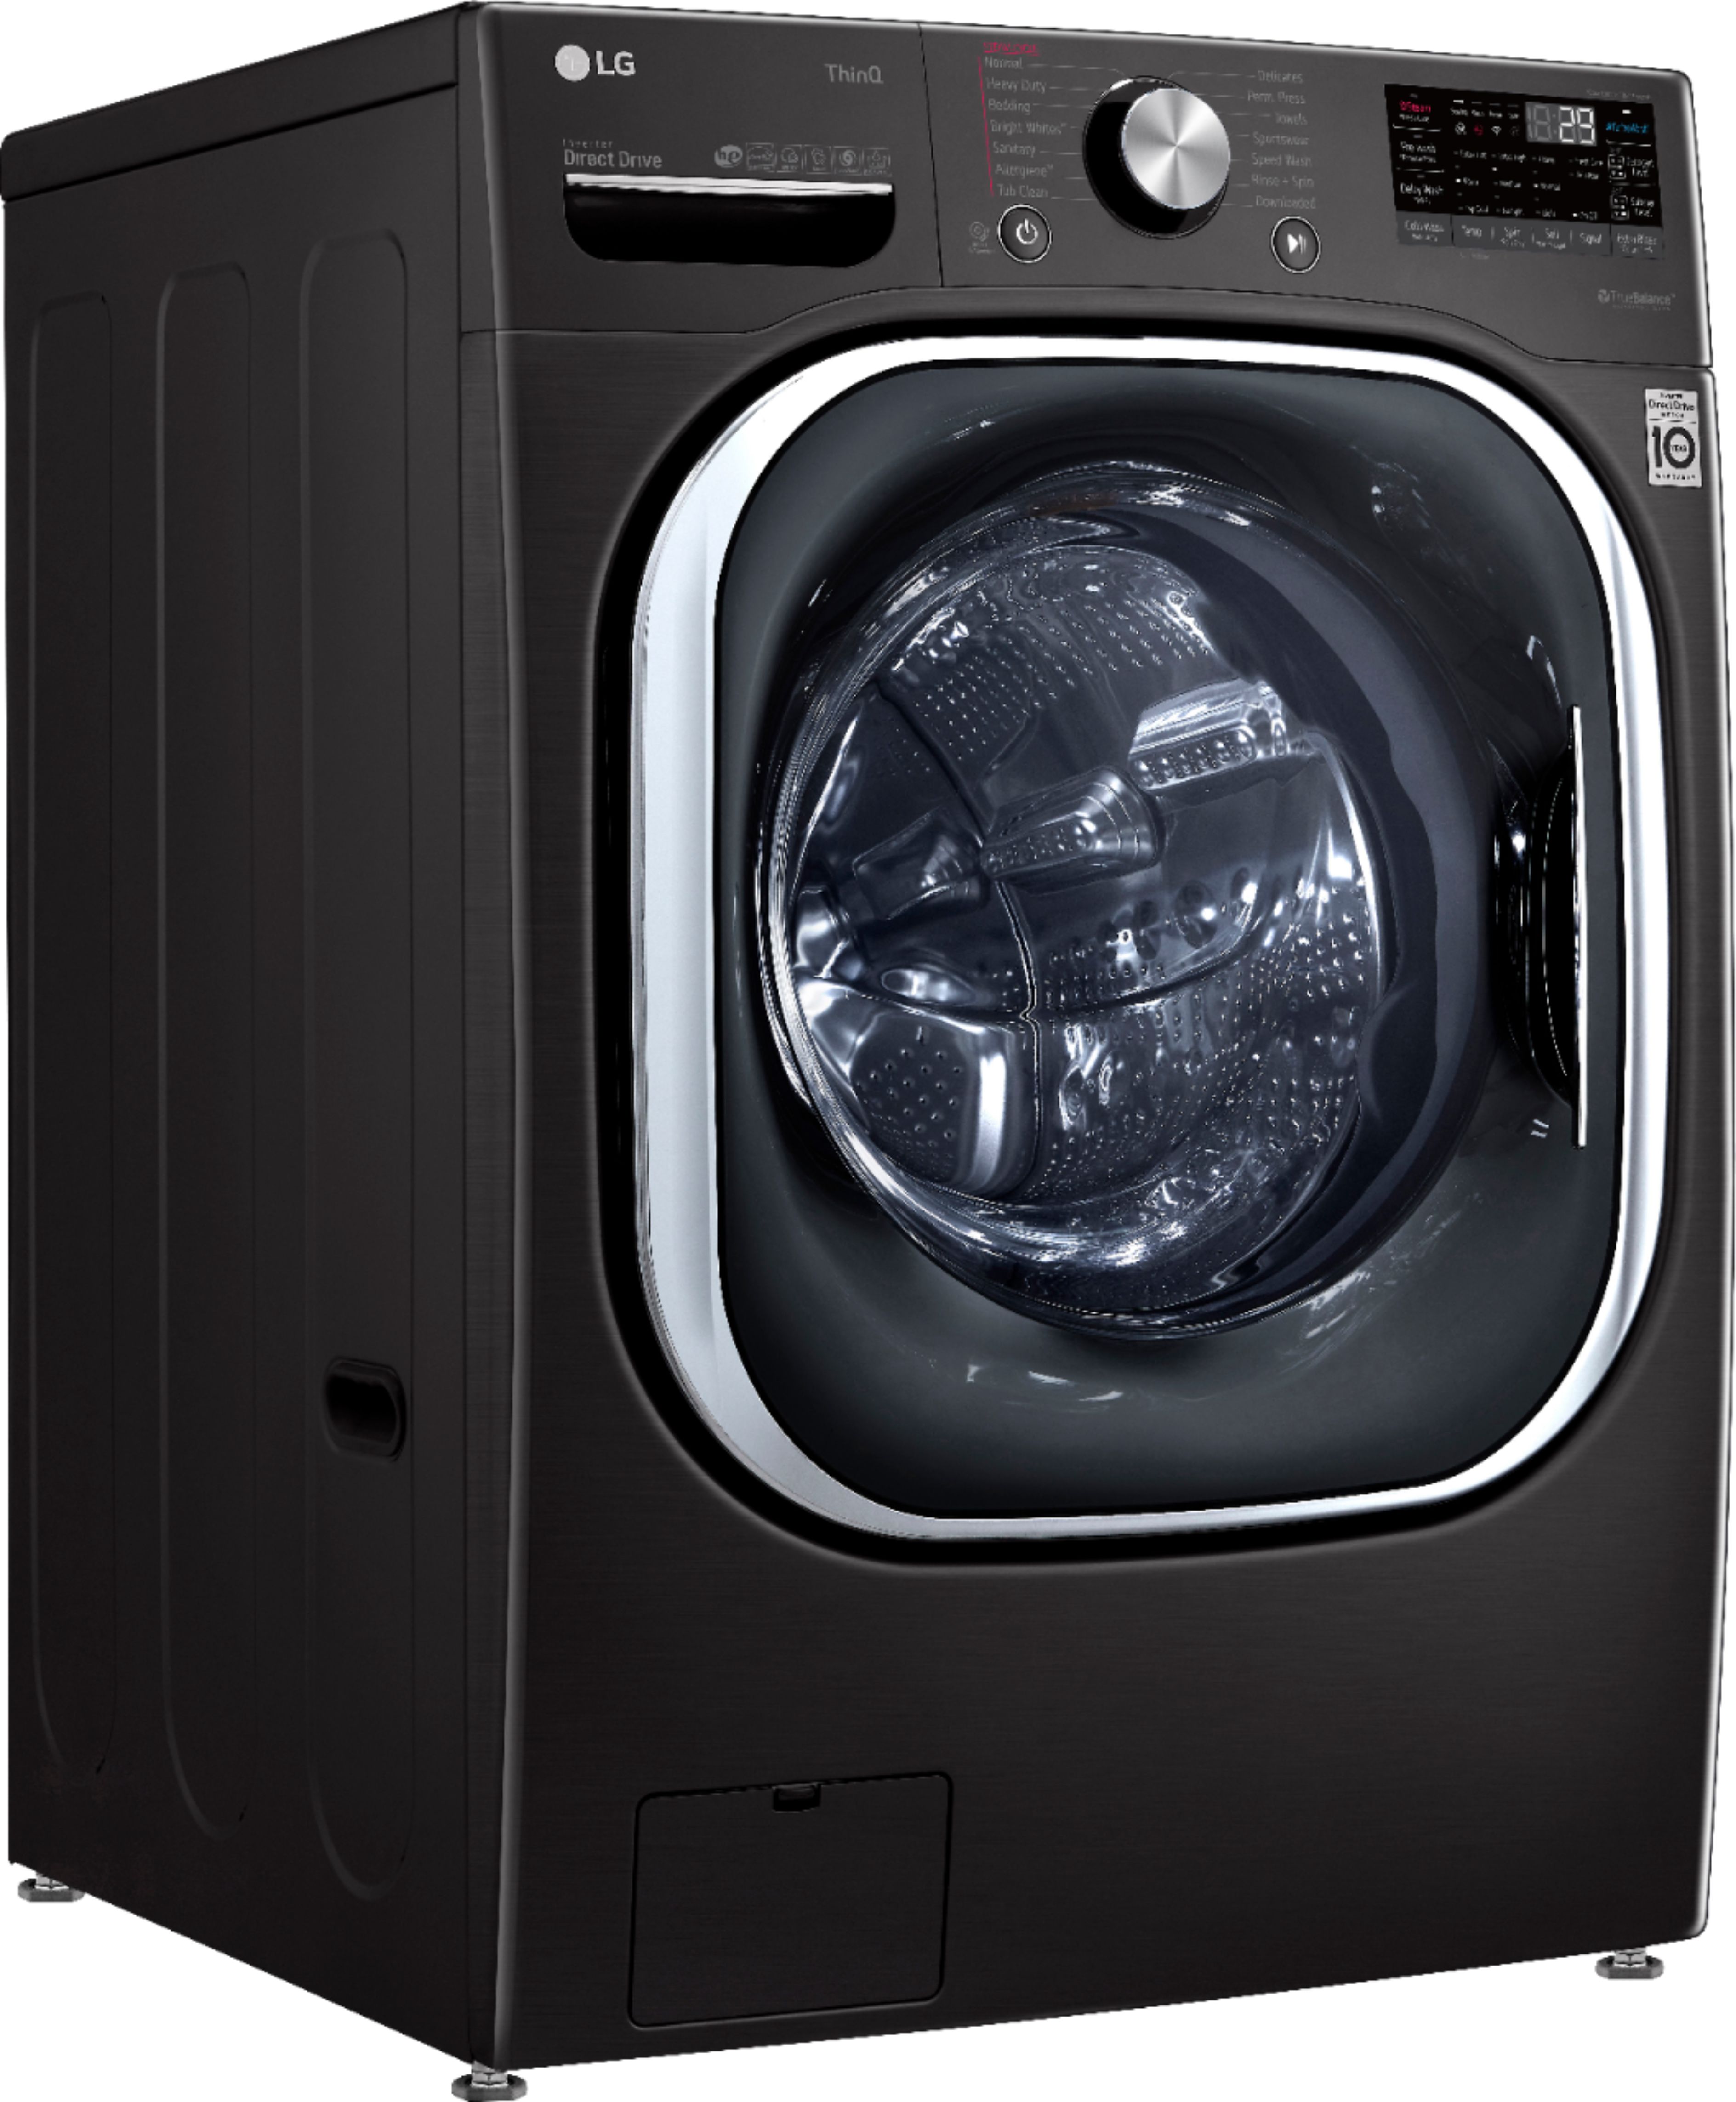 Angle View: LG - 5.0 Cu. Ft. High-Efficiency Stackable Smart Front Load Washer with Steam and Built-In Intelligence - Black steel